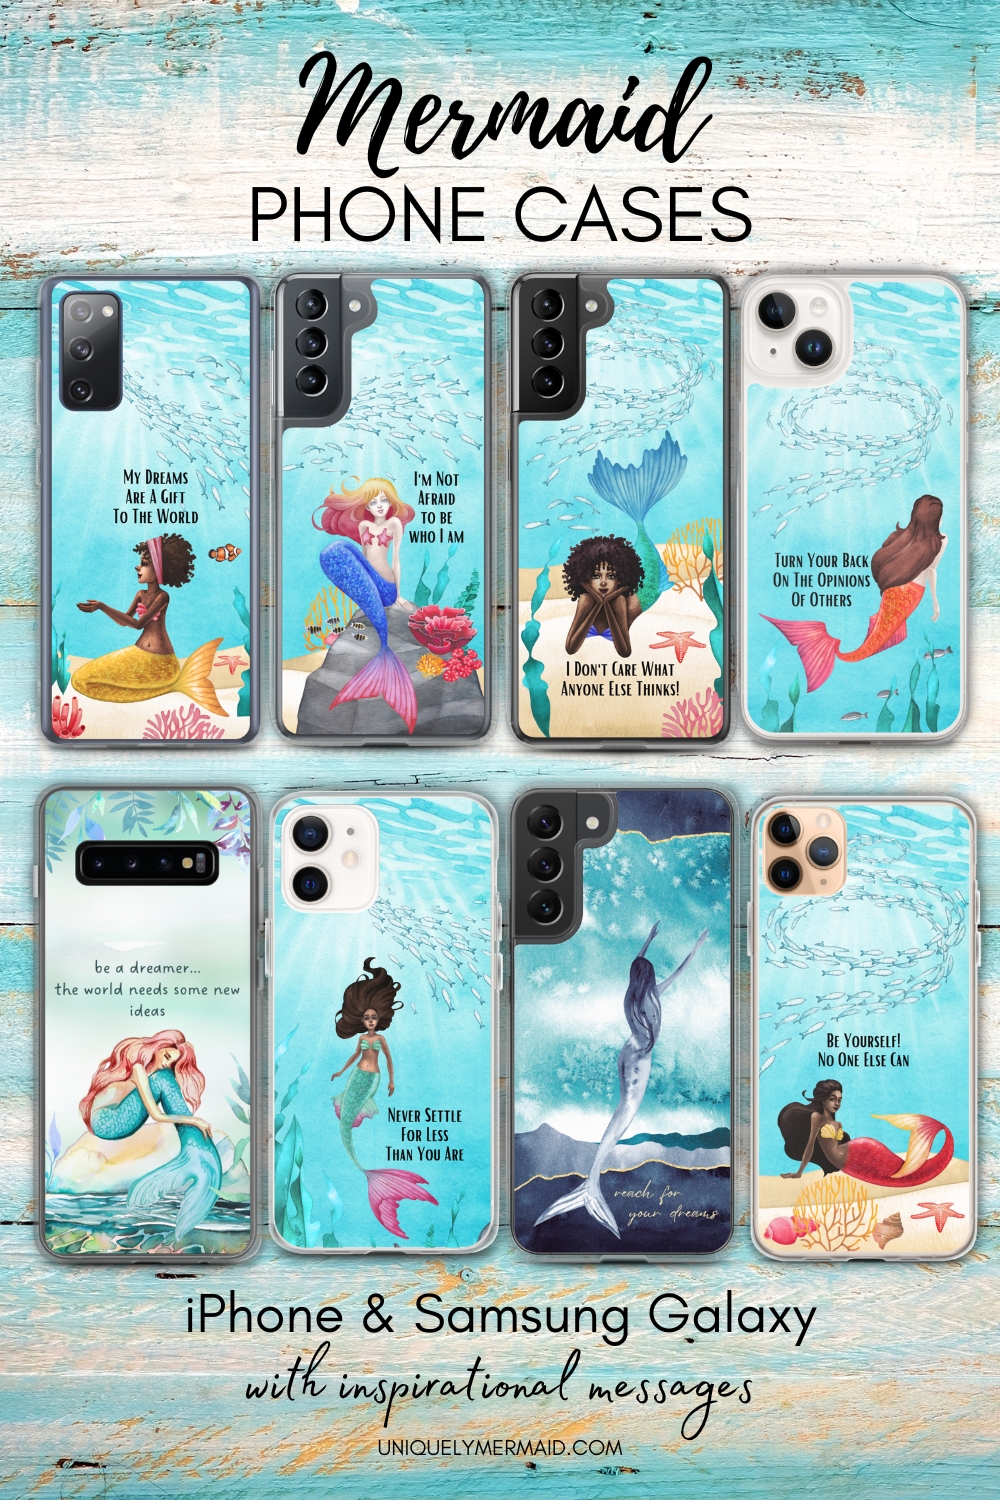 A mermaid phone case that will inspire you and encourage you with its quotes.